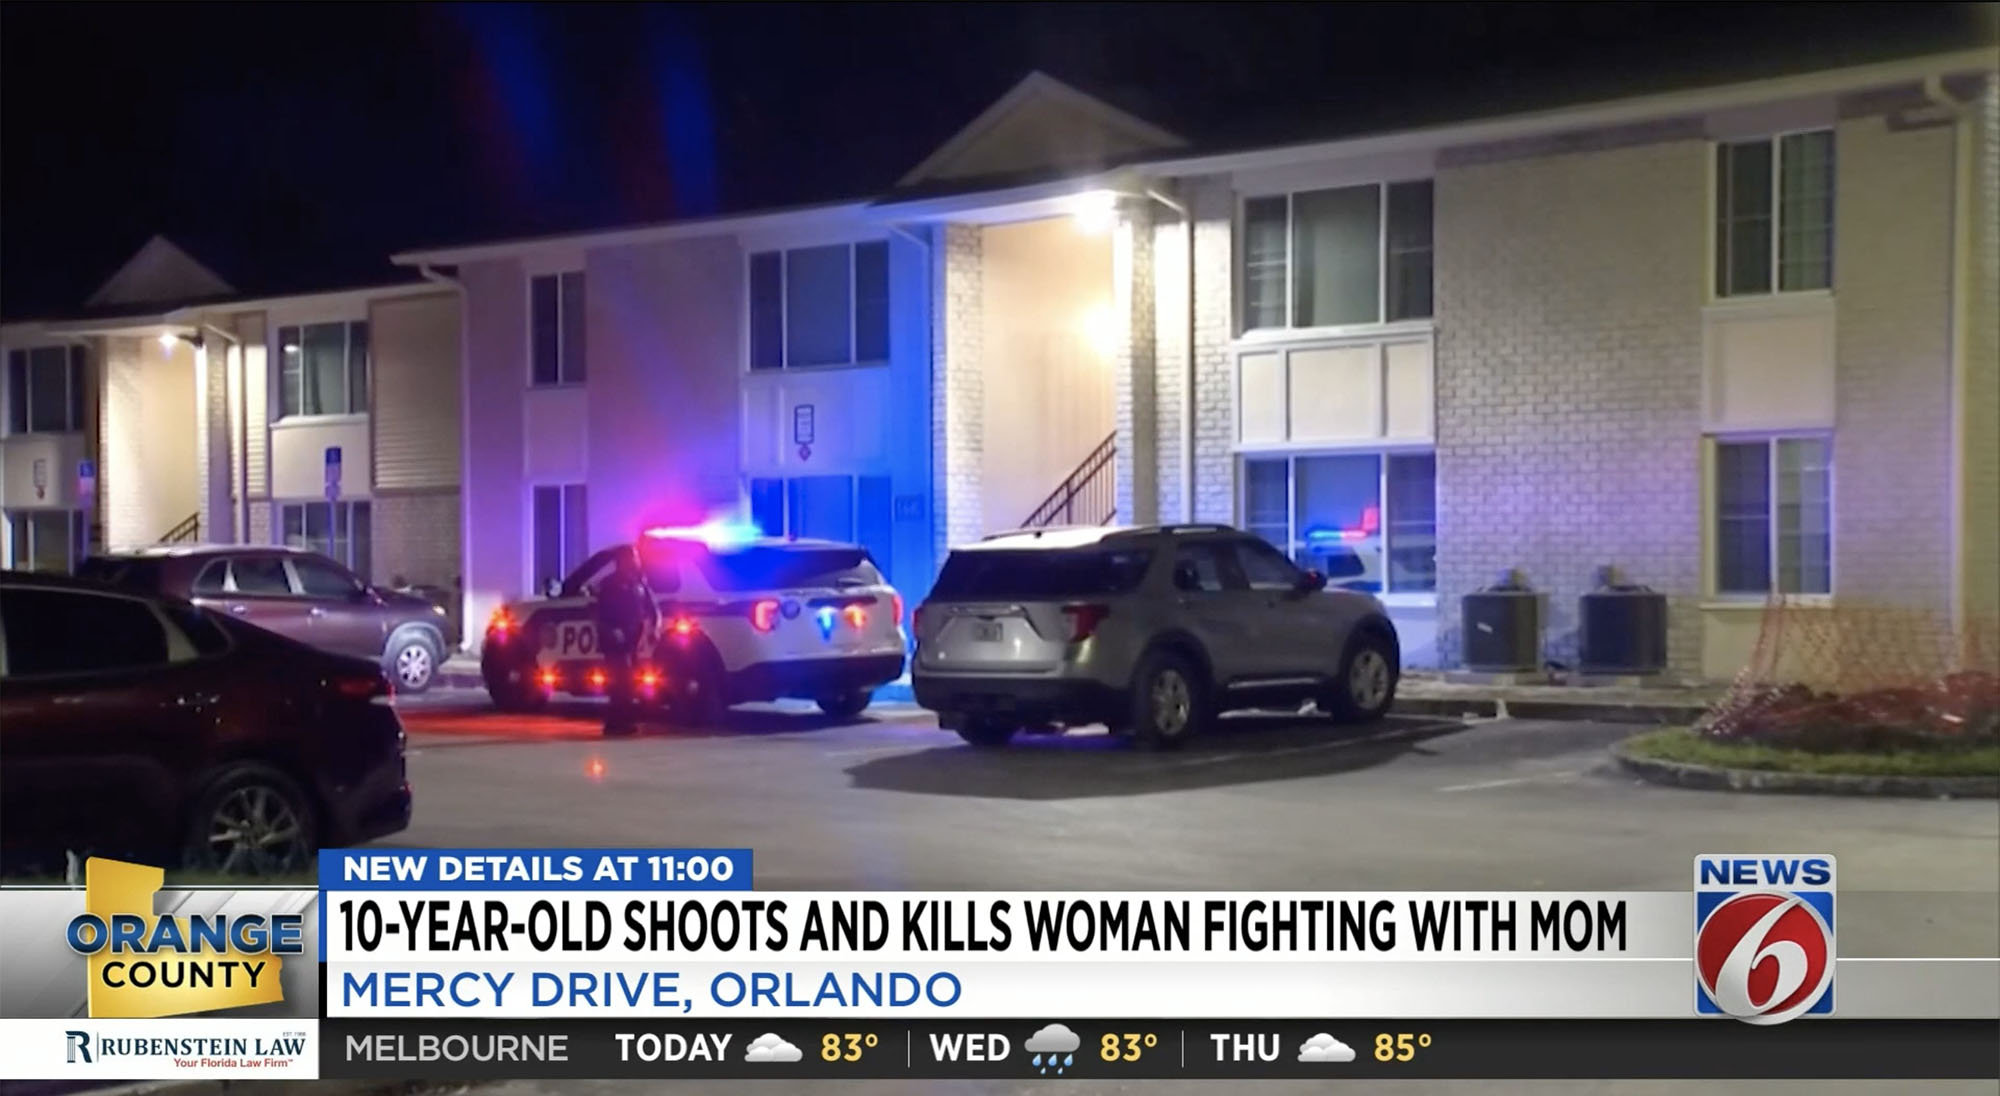 USA: A 10-year-old girl shot and killed a man who fought with her mother - Photo 2.